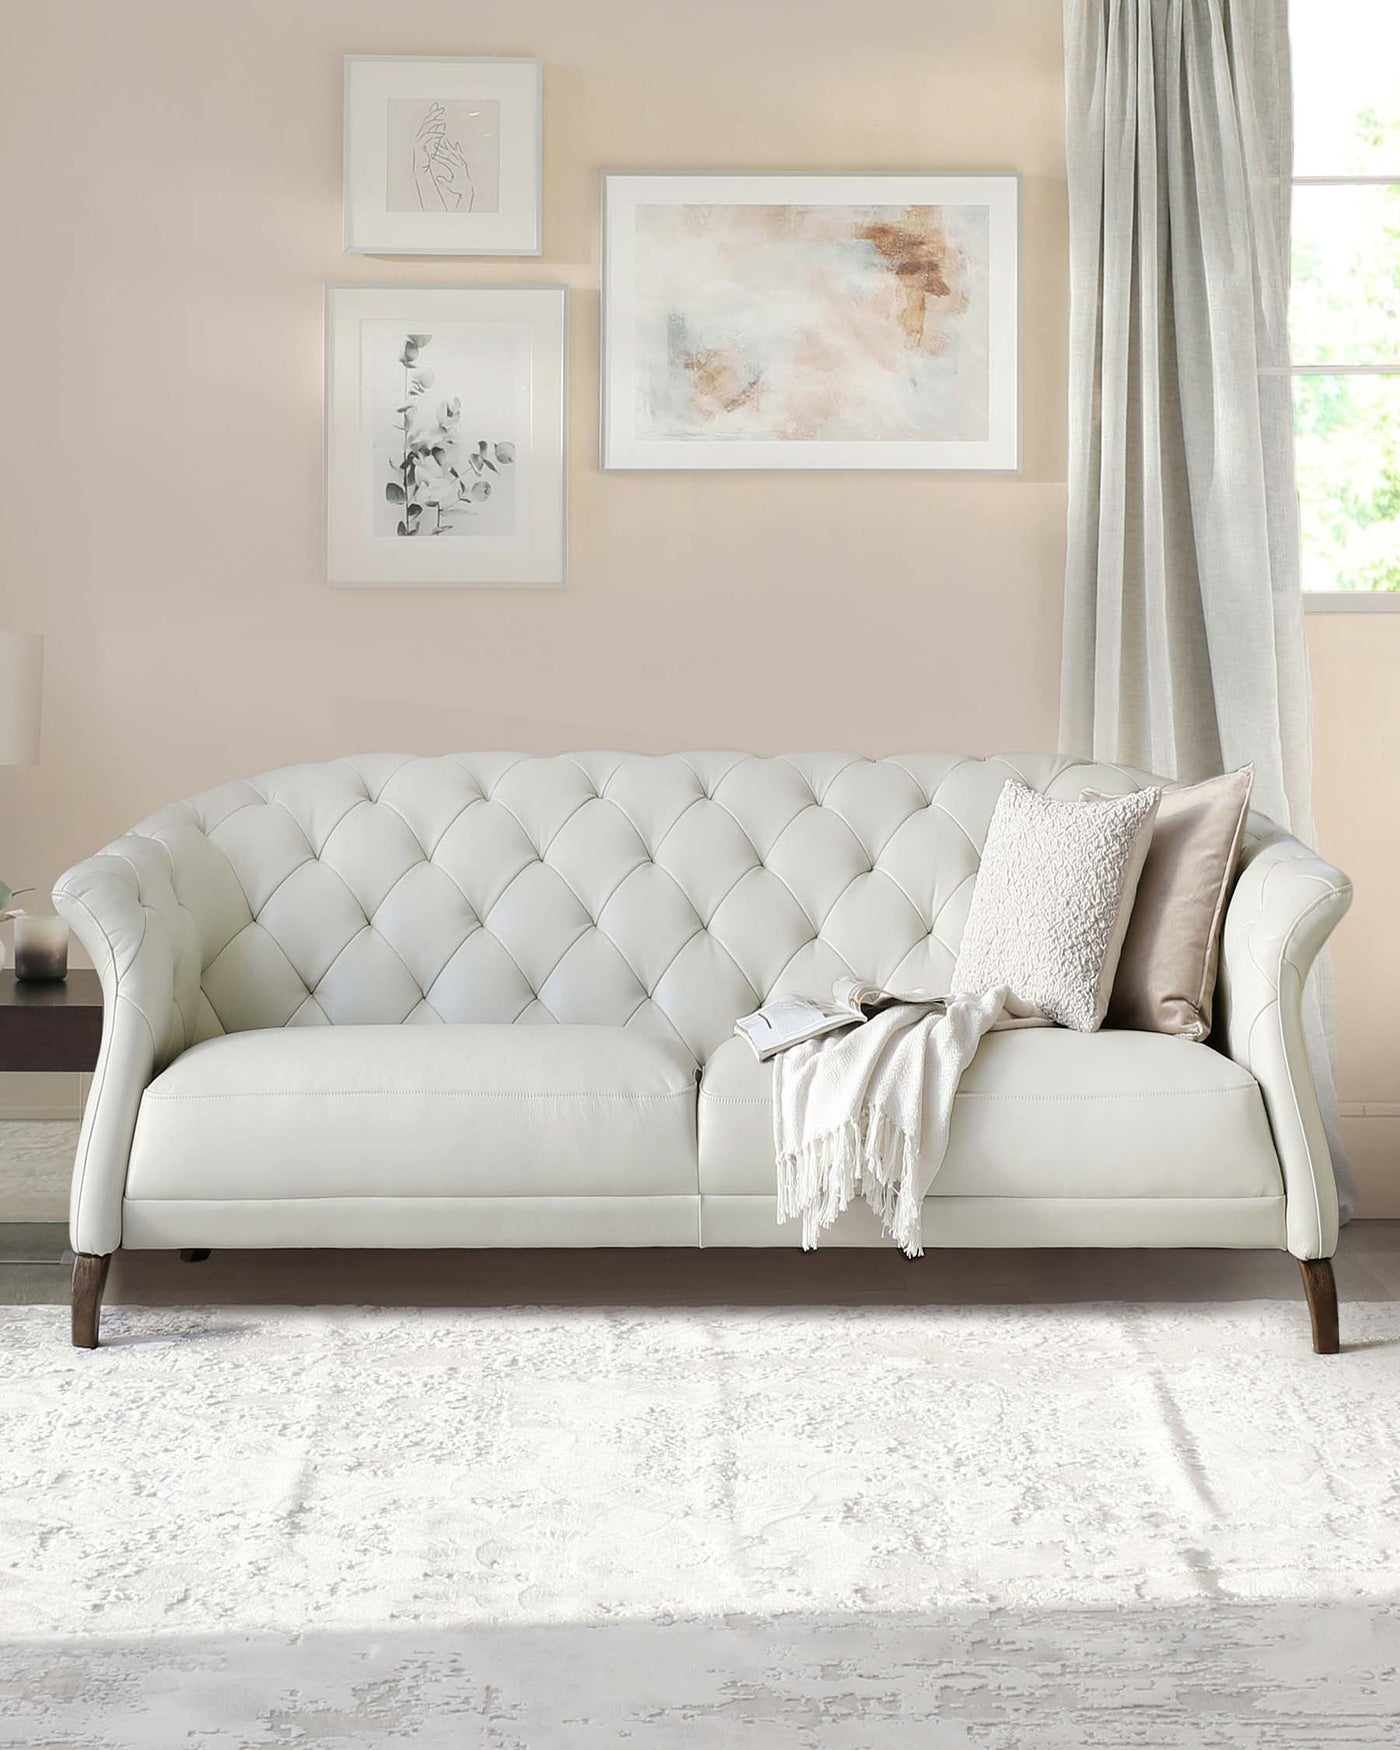 Elegant ivory tufted chesterfield sofa with rolled arms and dark wooden legs, adorned with a textured throw blanket and decorative pillows, set against a light patterned area rug in a room with neutral wall colours and framed artwork.